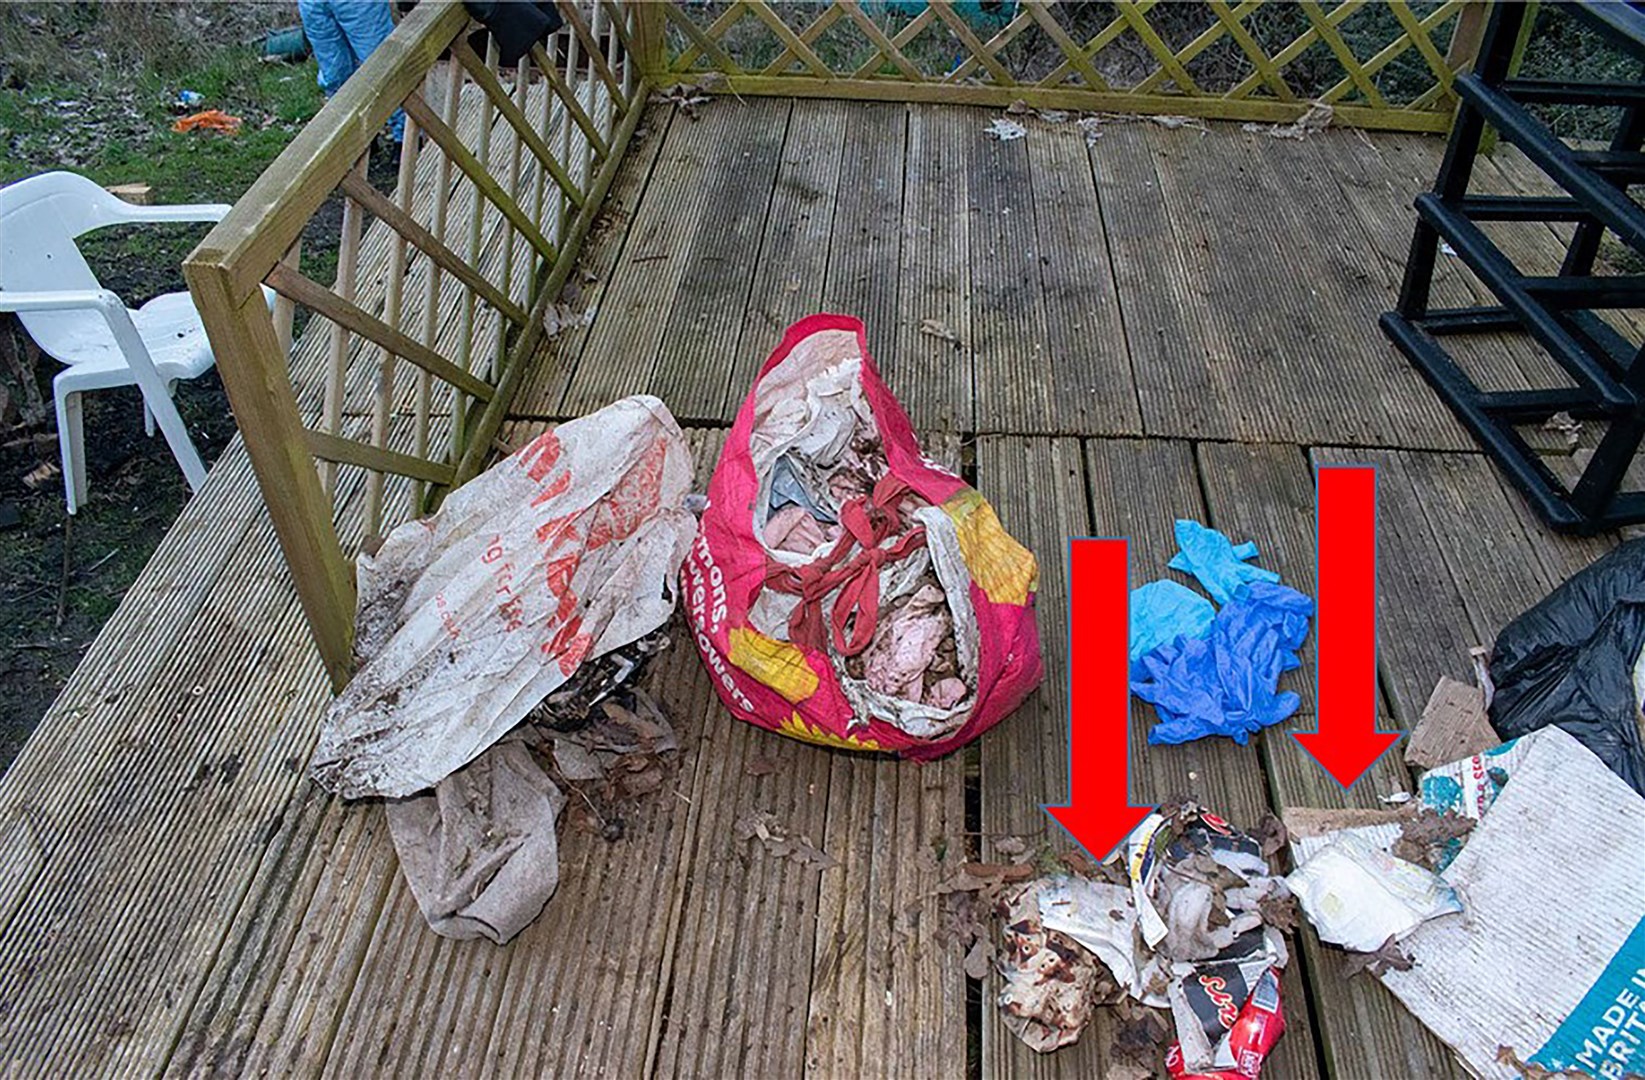 Items including two nappies found in a Lidl bag which included the body of a missing baby Victoria (Met Police/PA)